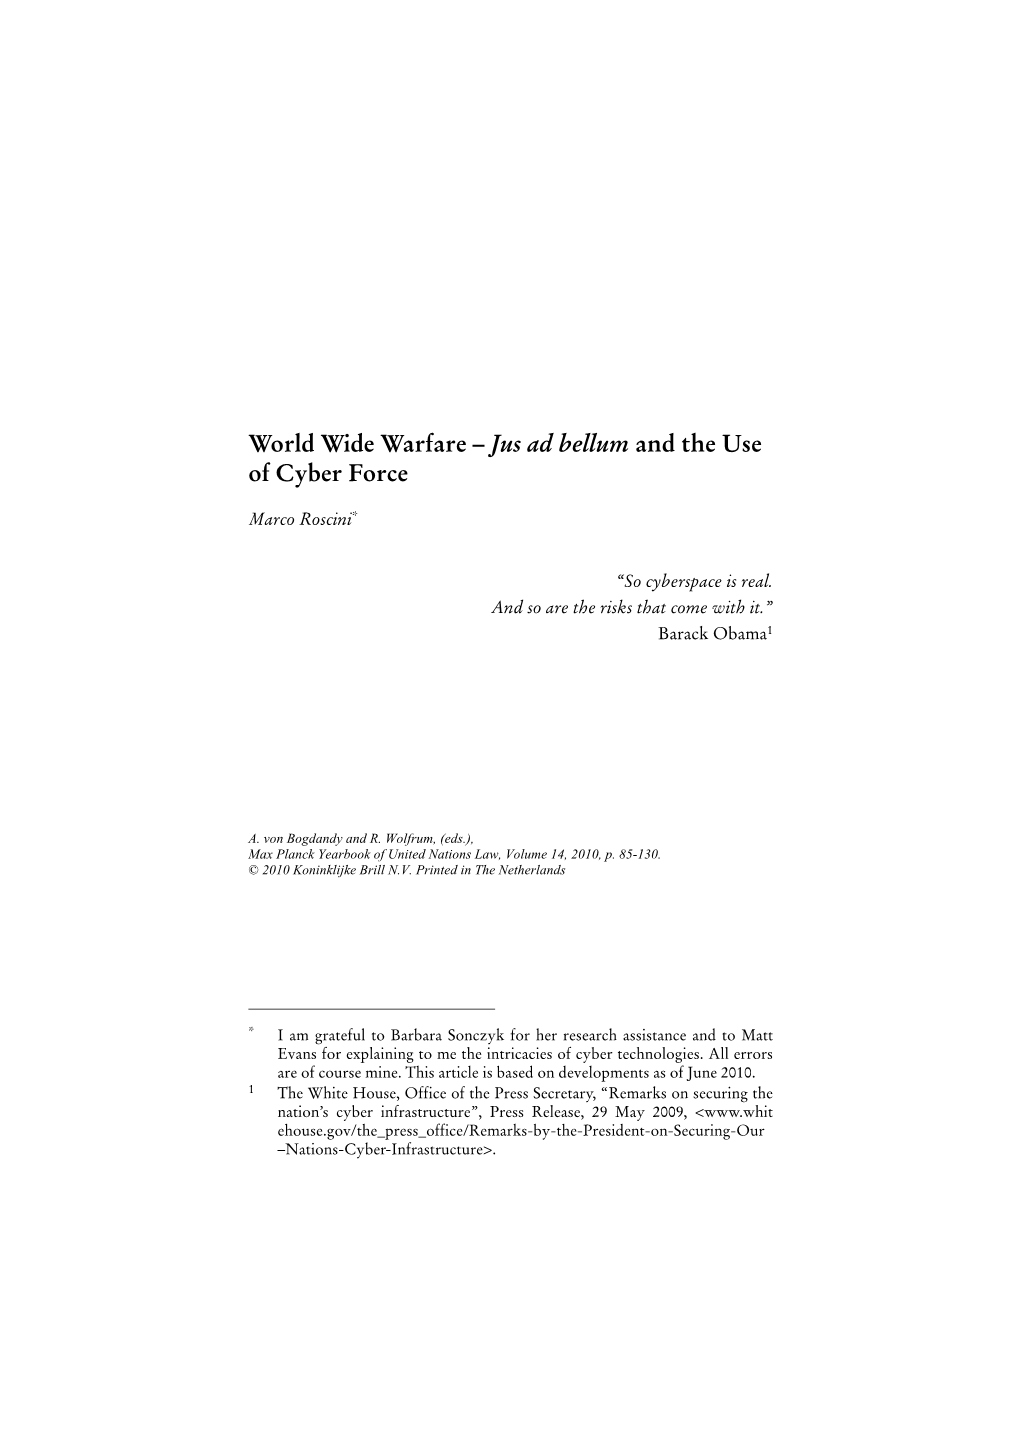 World Wide Warfare – Jus Ad Bellum and the Use of Cyber Force